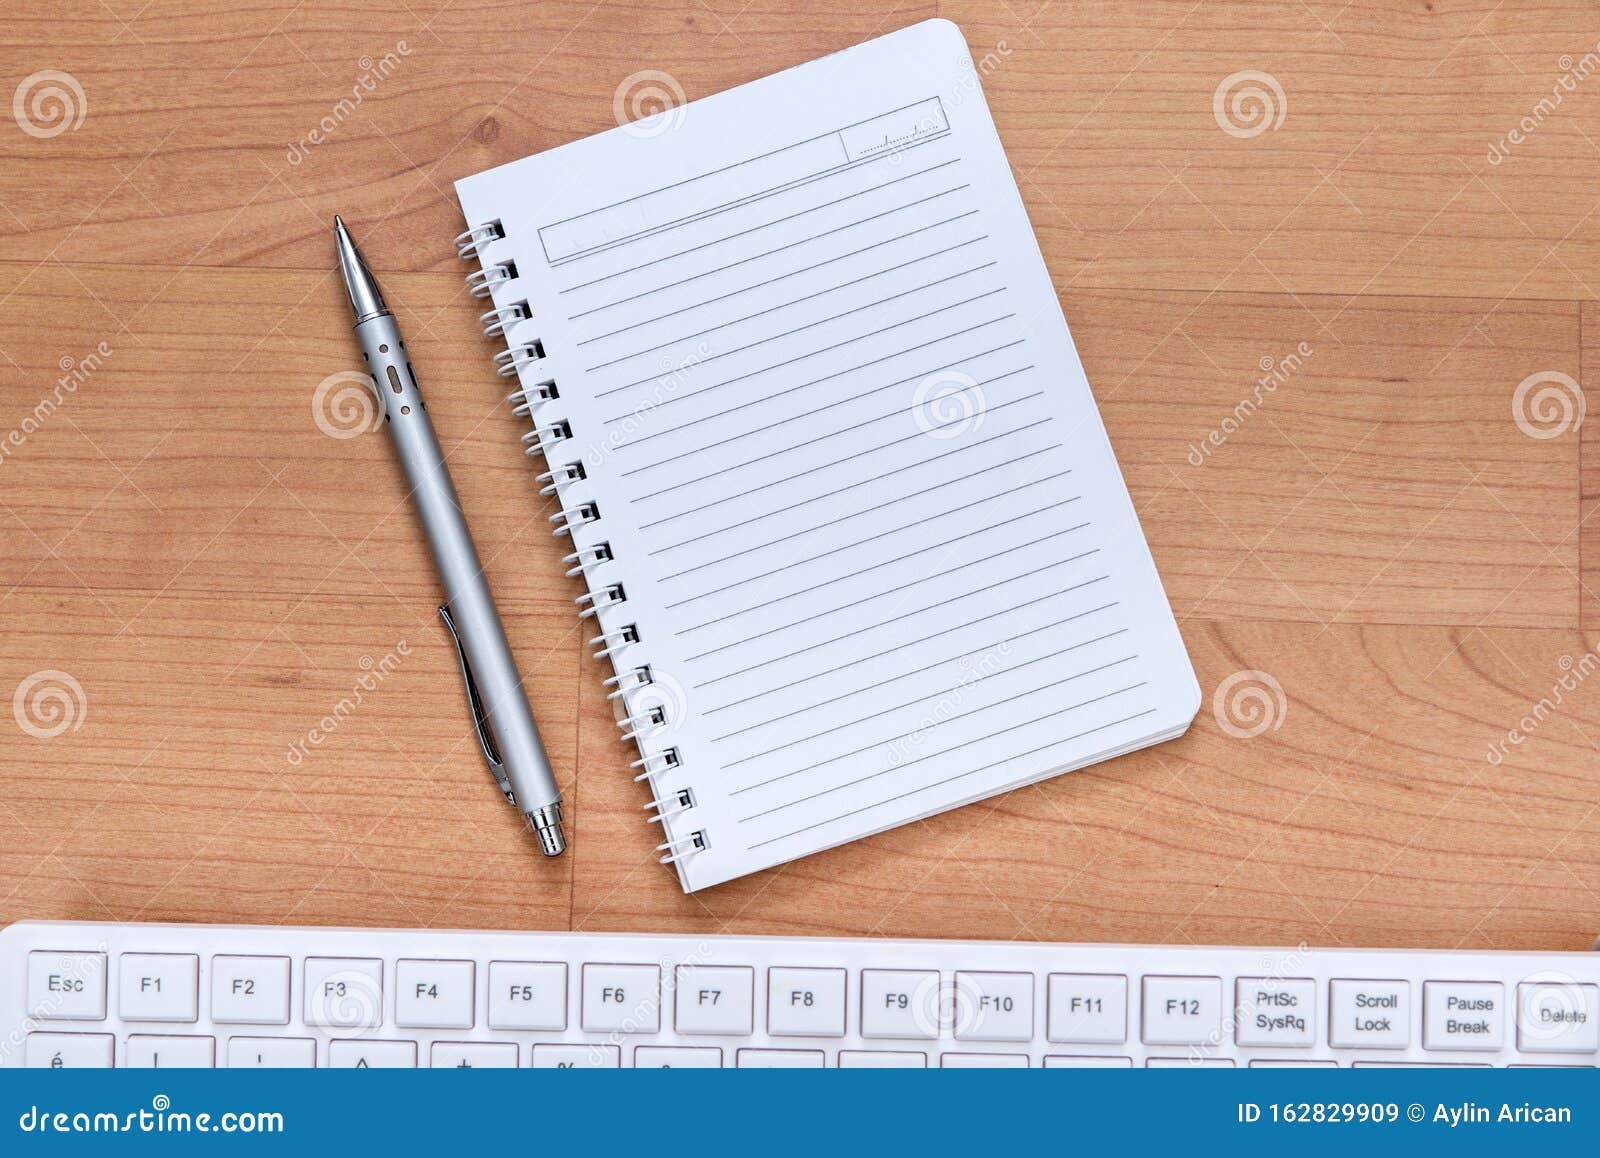 blank notebook and computer keybord on the desk